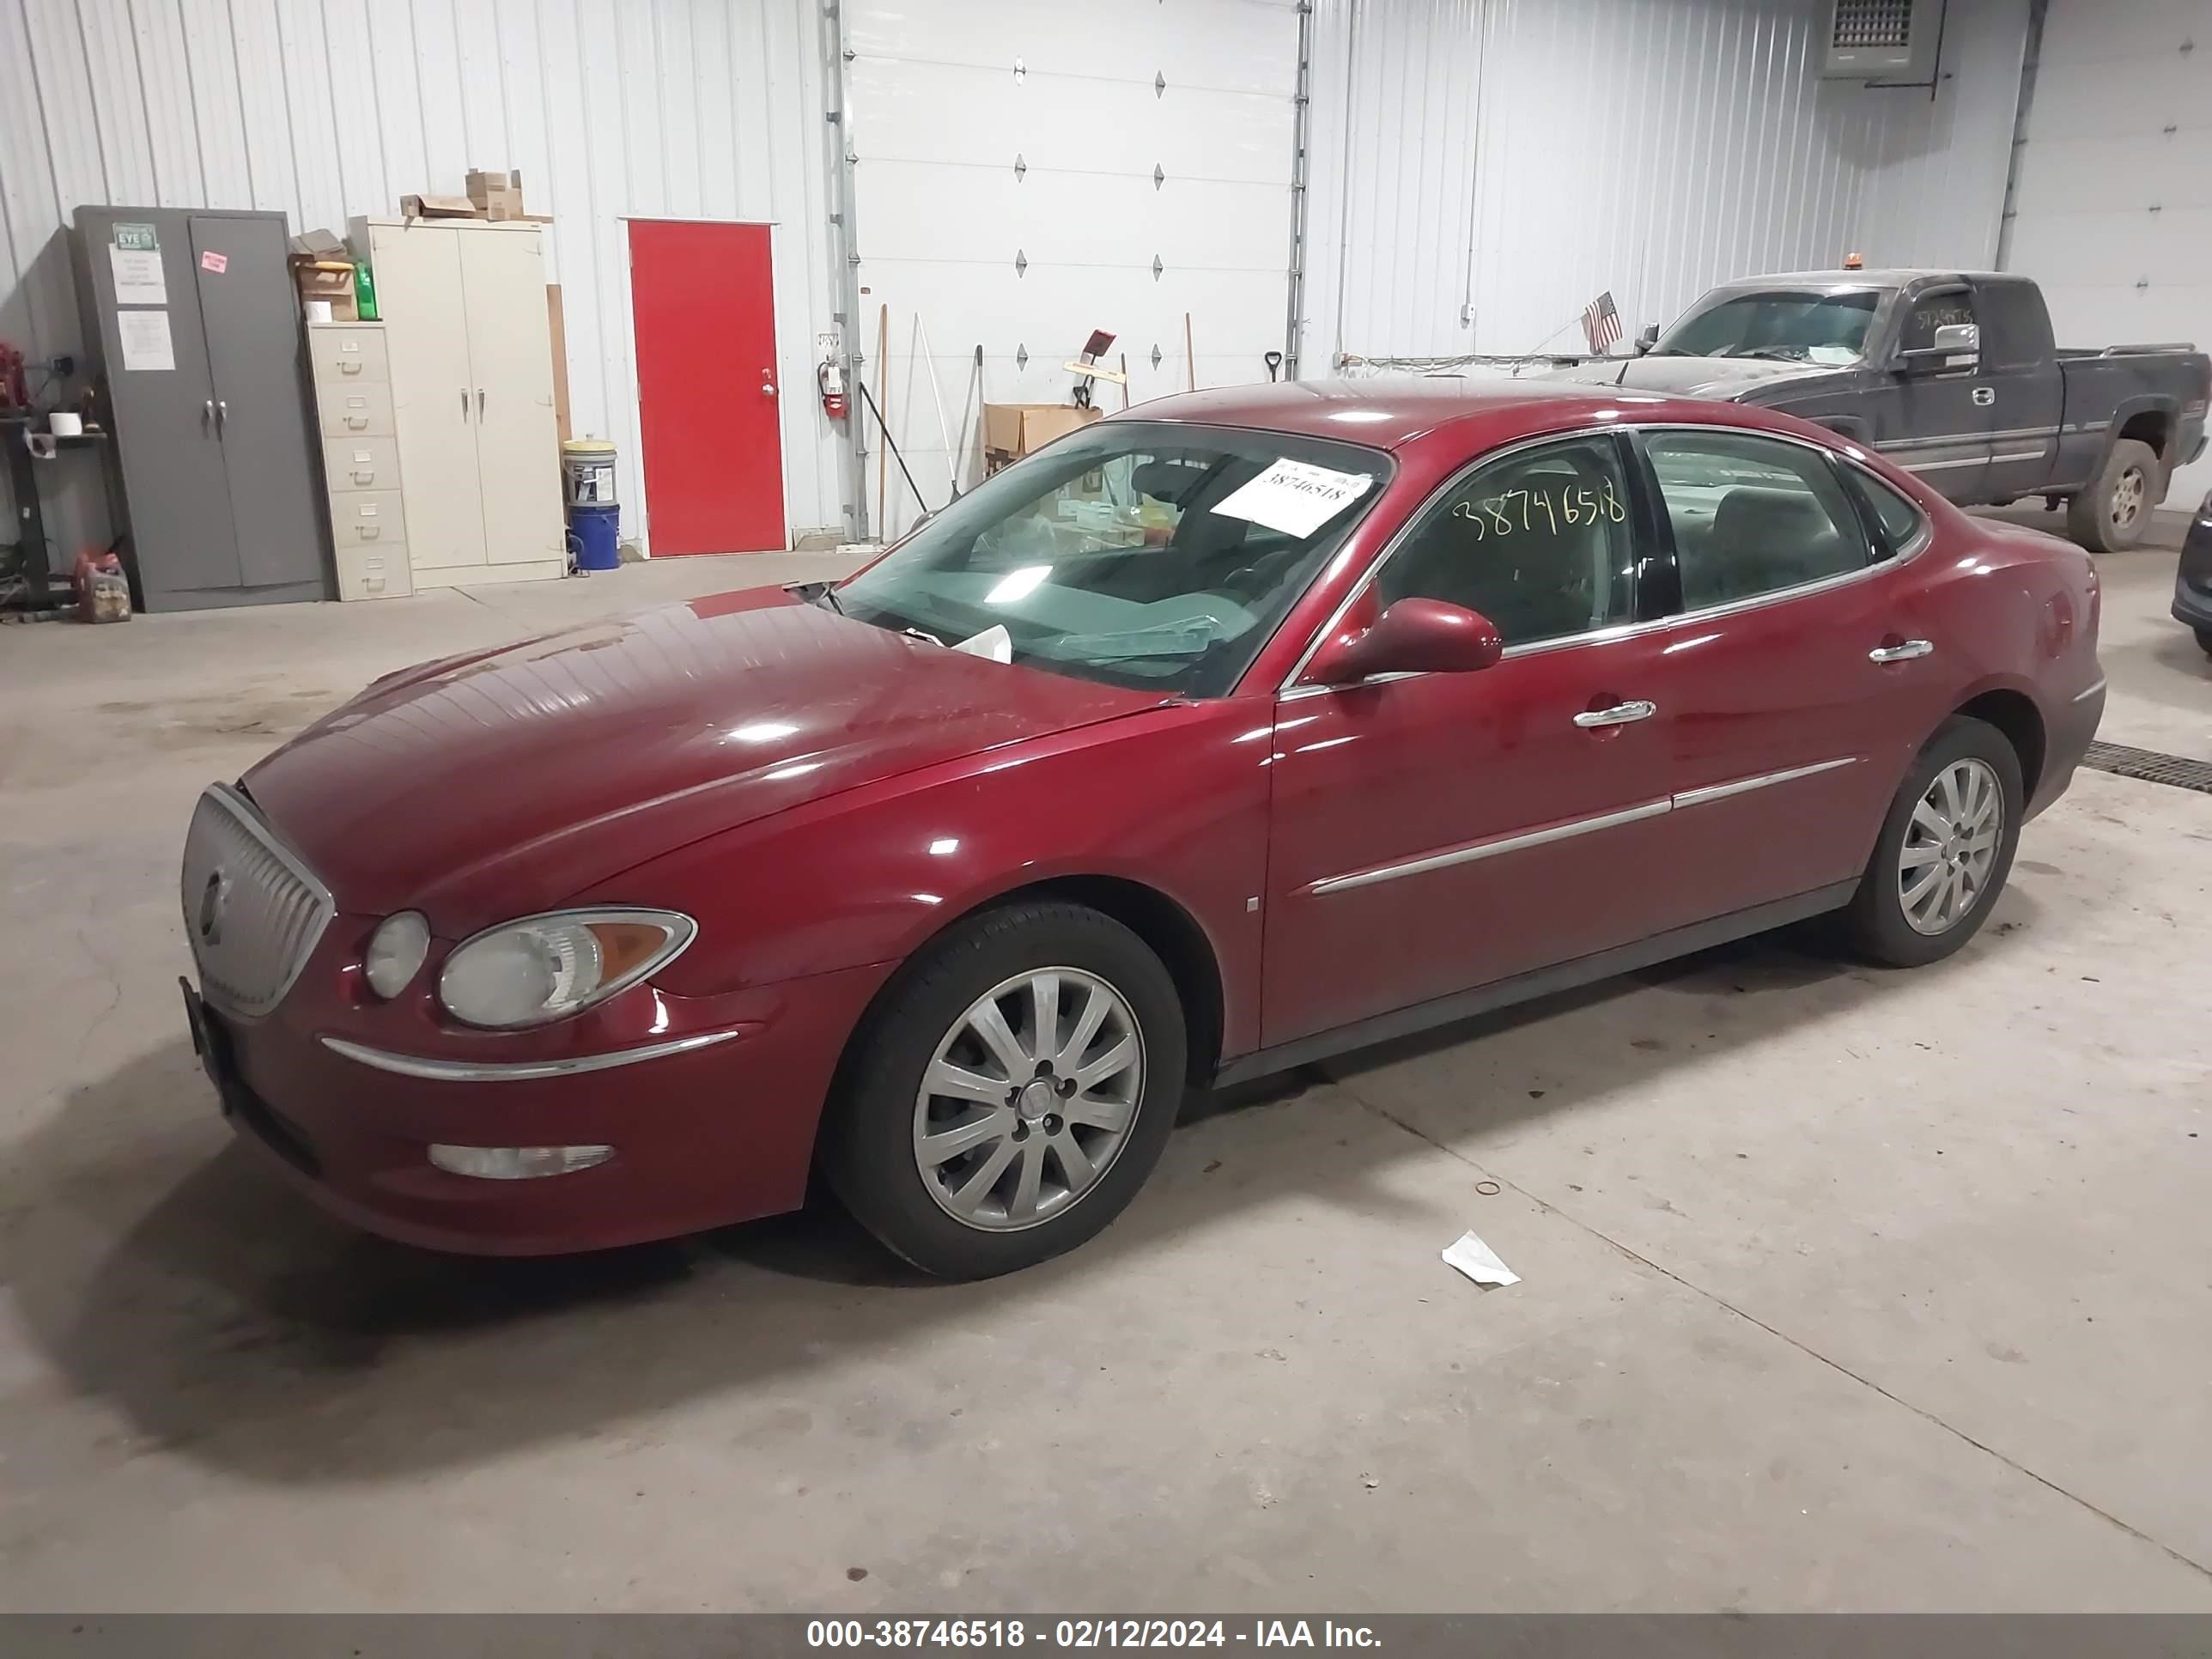 2G4WC582581371381  - BUICK LACROSSE  2008 IMG - 1